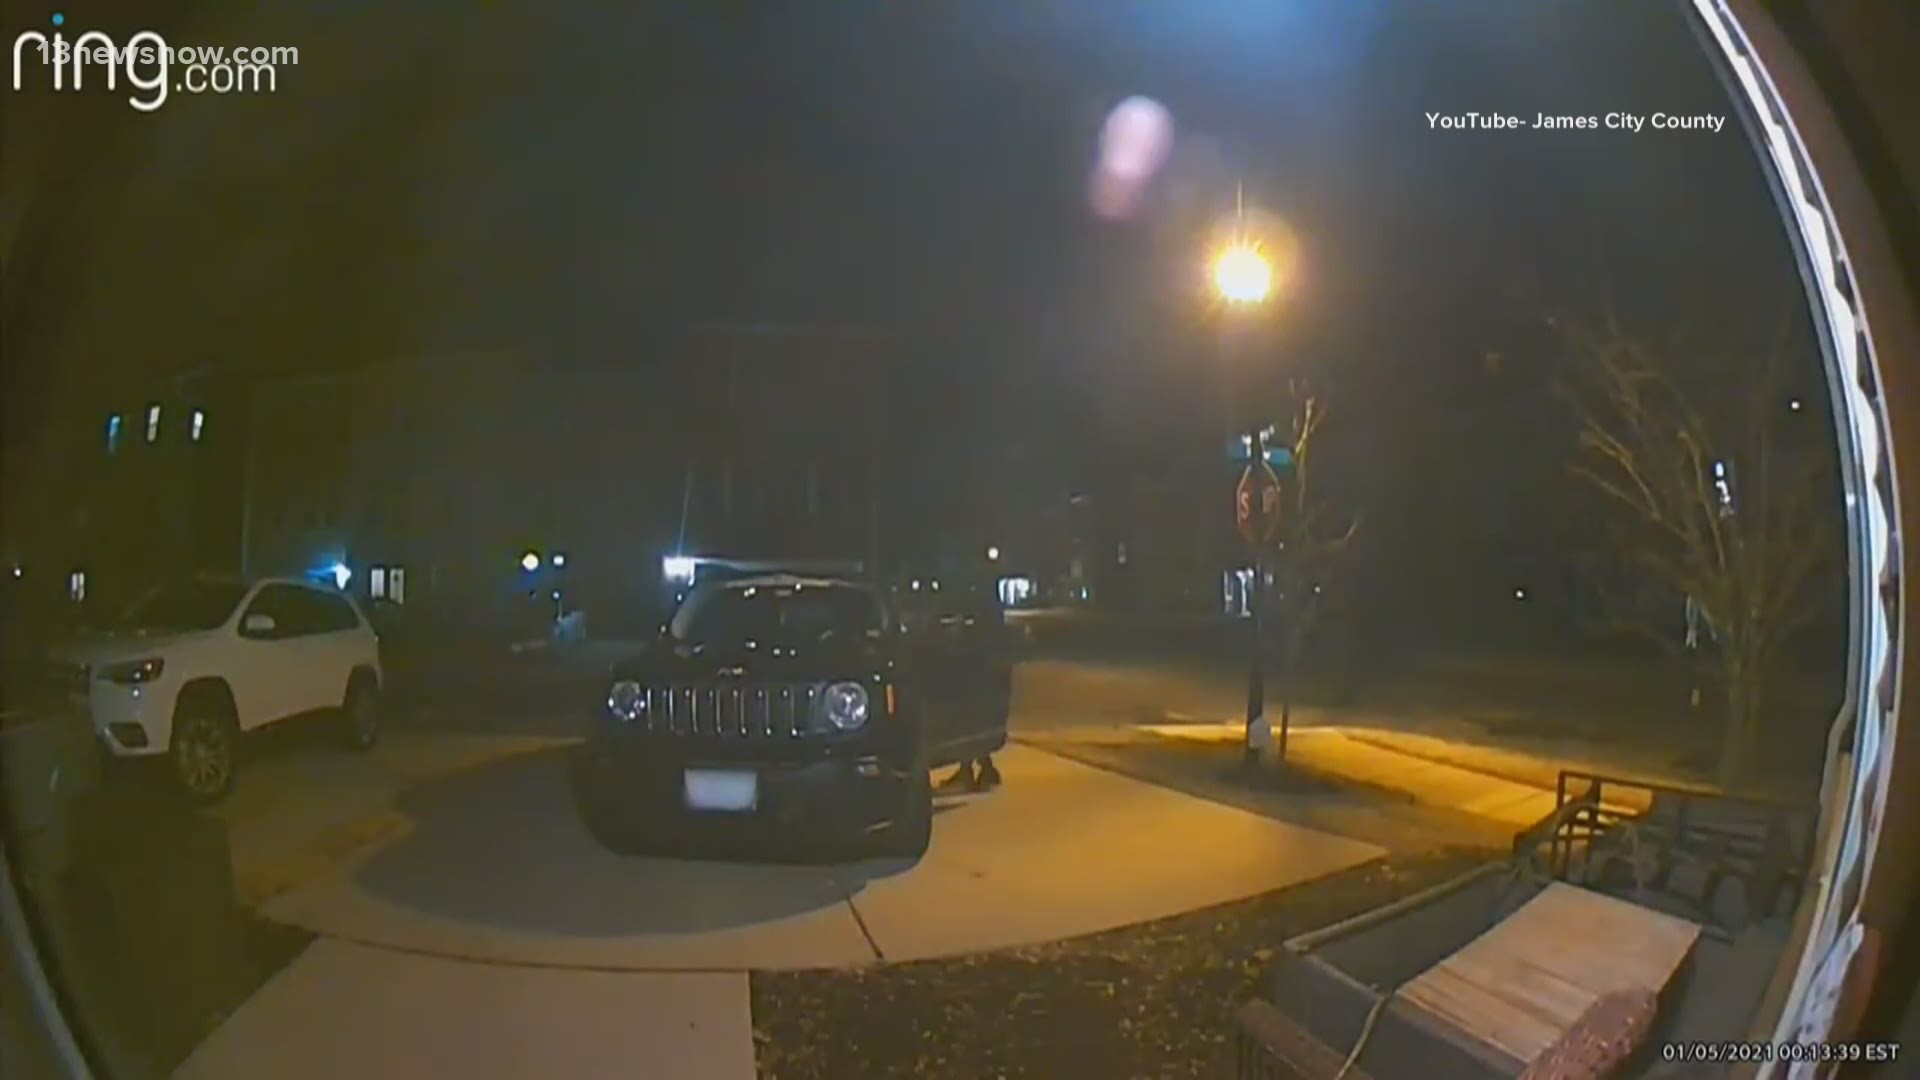 James City Co. Police were called about an individual who was caught on a ring camera, going into multiple unlocked vehicles in the Village at Candle Station.